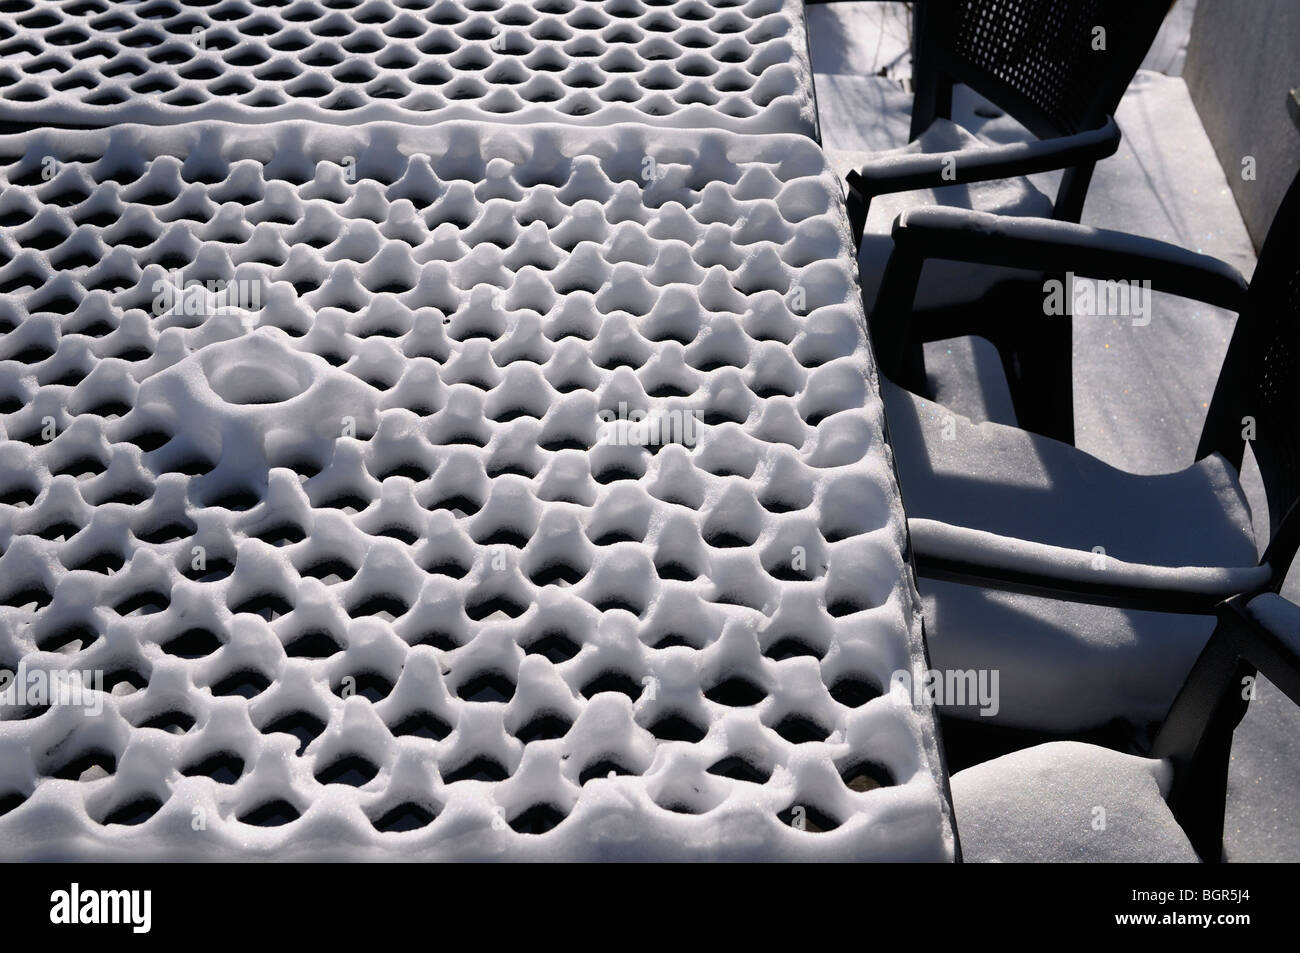 Snow covered patio chairs and table with grid pattern looking like egg carton Stock Photo